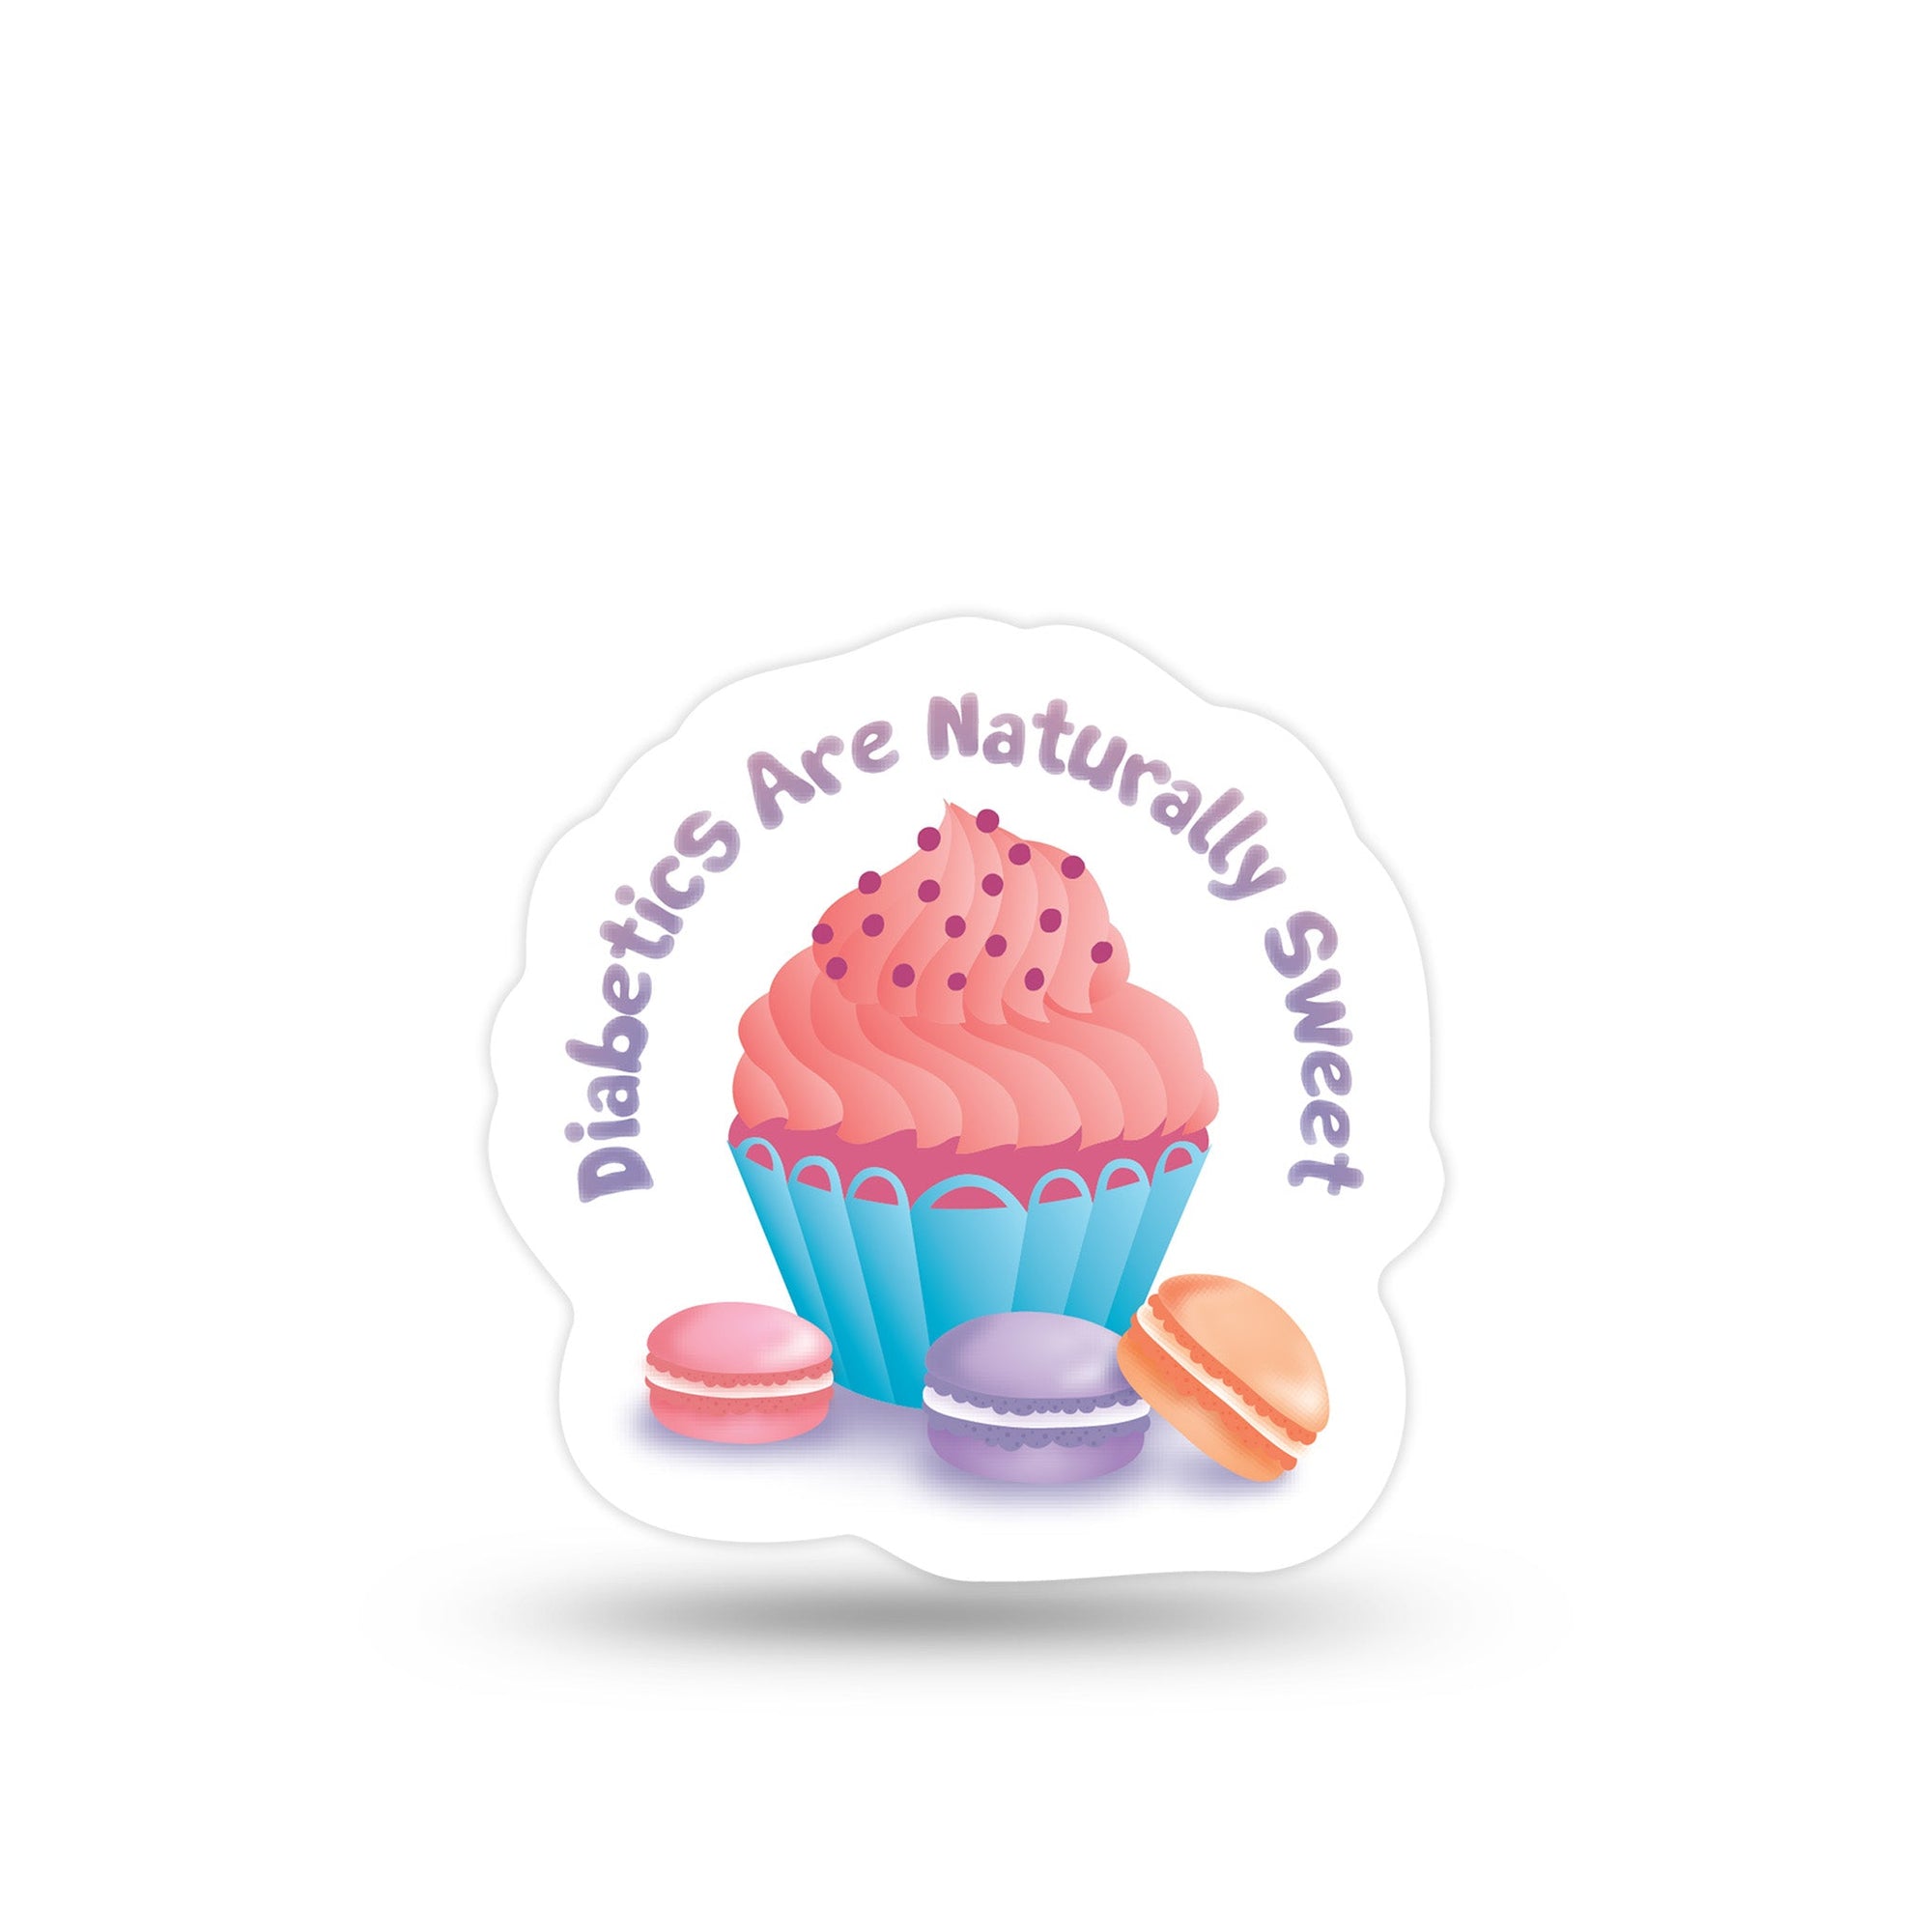 ExpressionMed Diabetics are Naturally Sweet Decal Sticker Macarons and Cupcakes, Decal Sticker Only